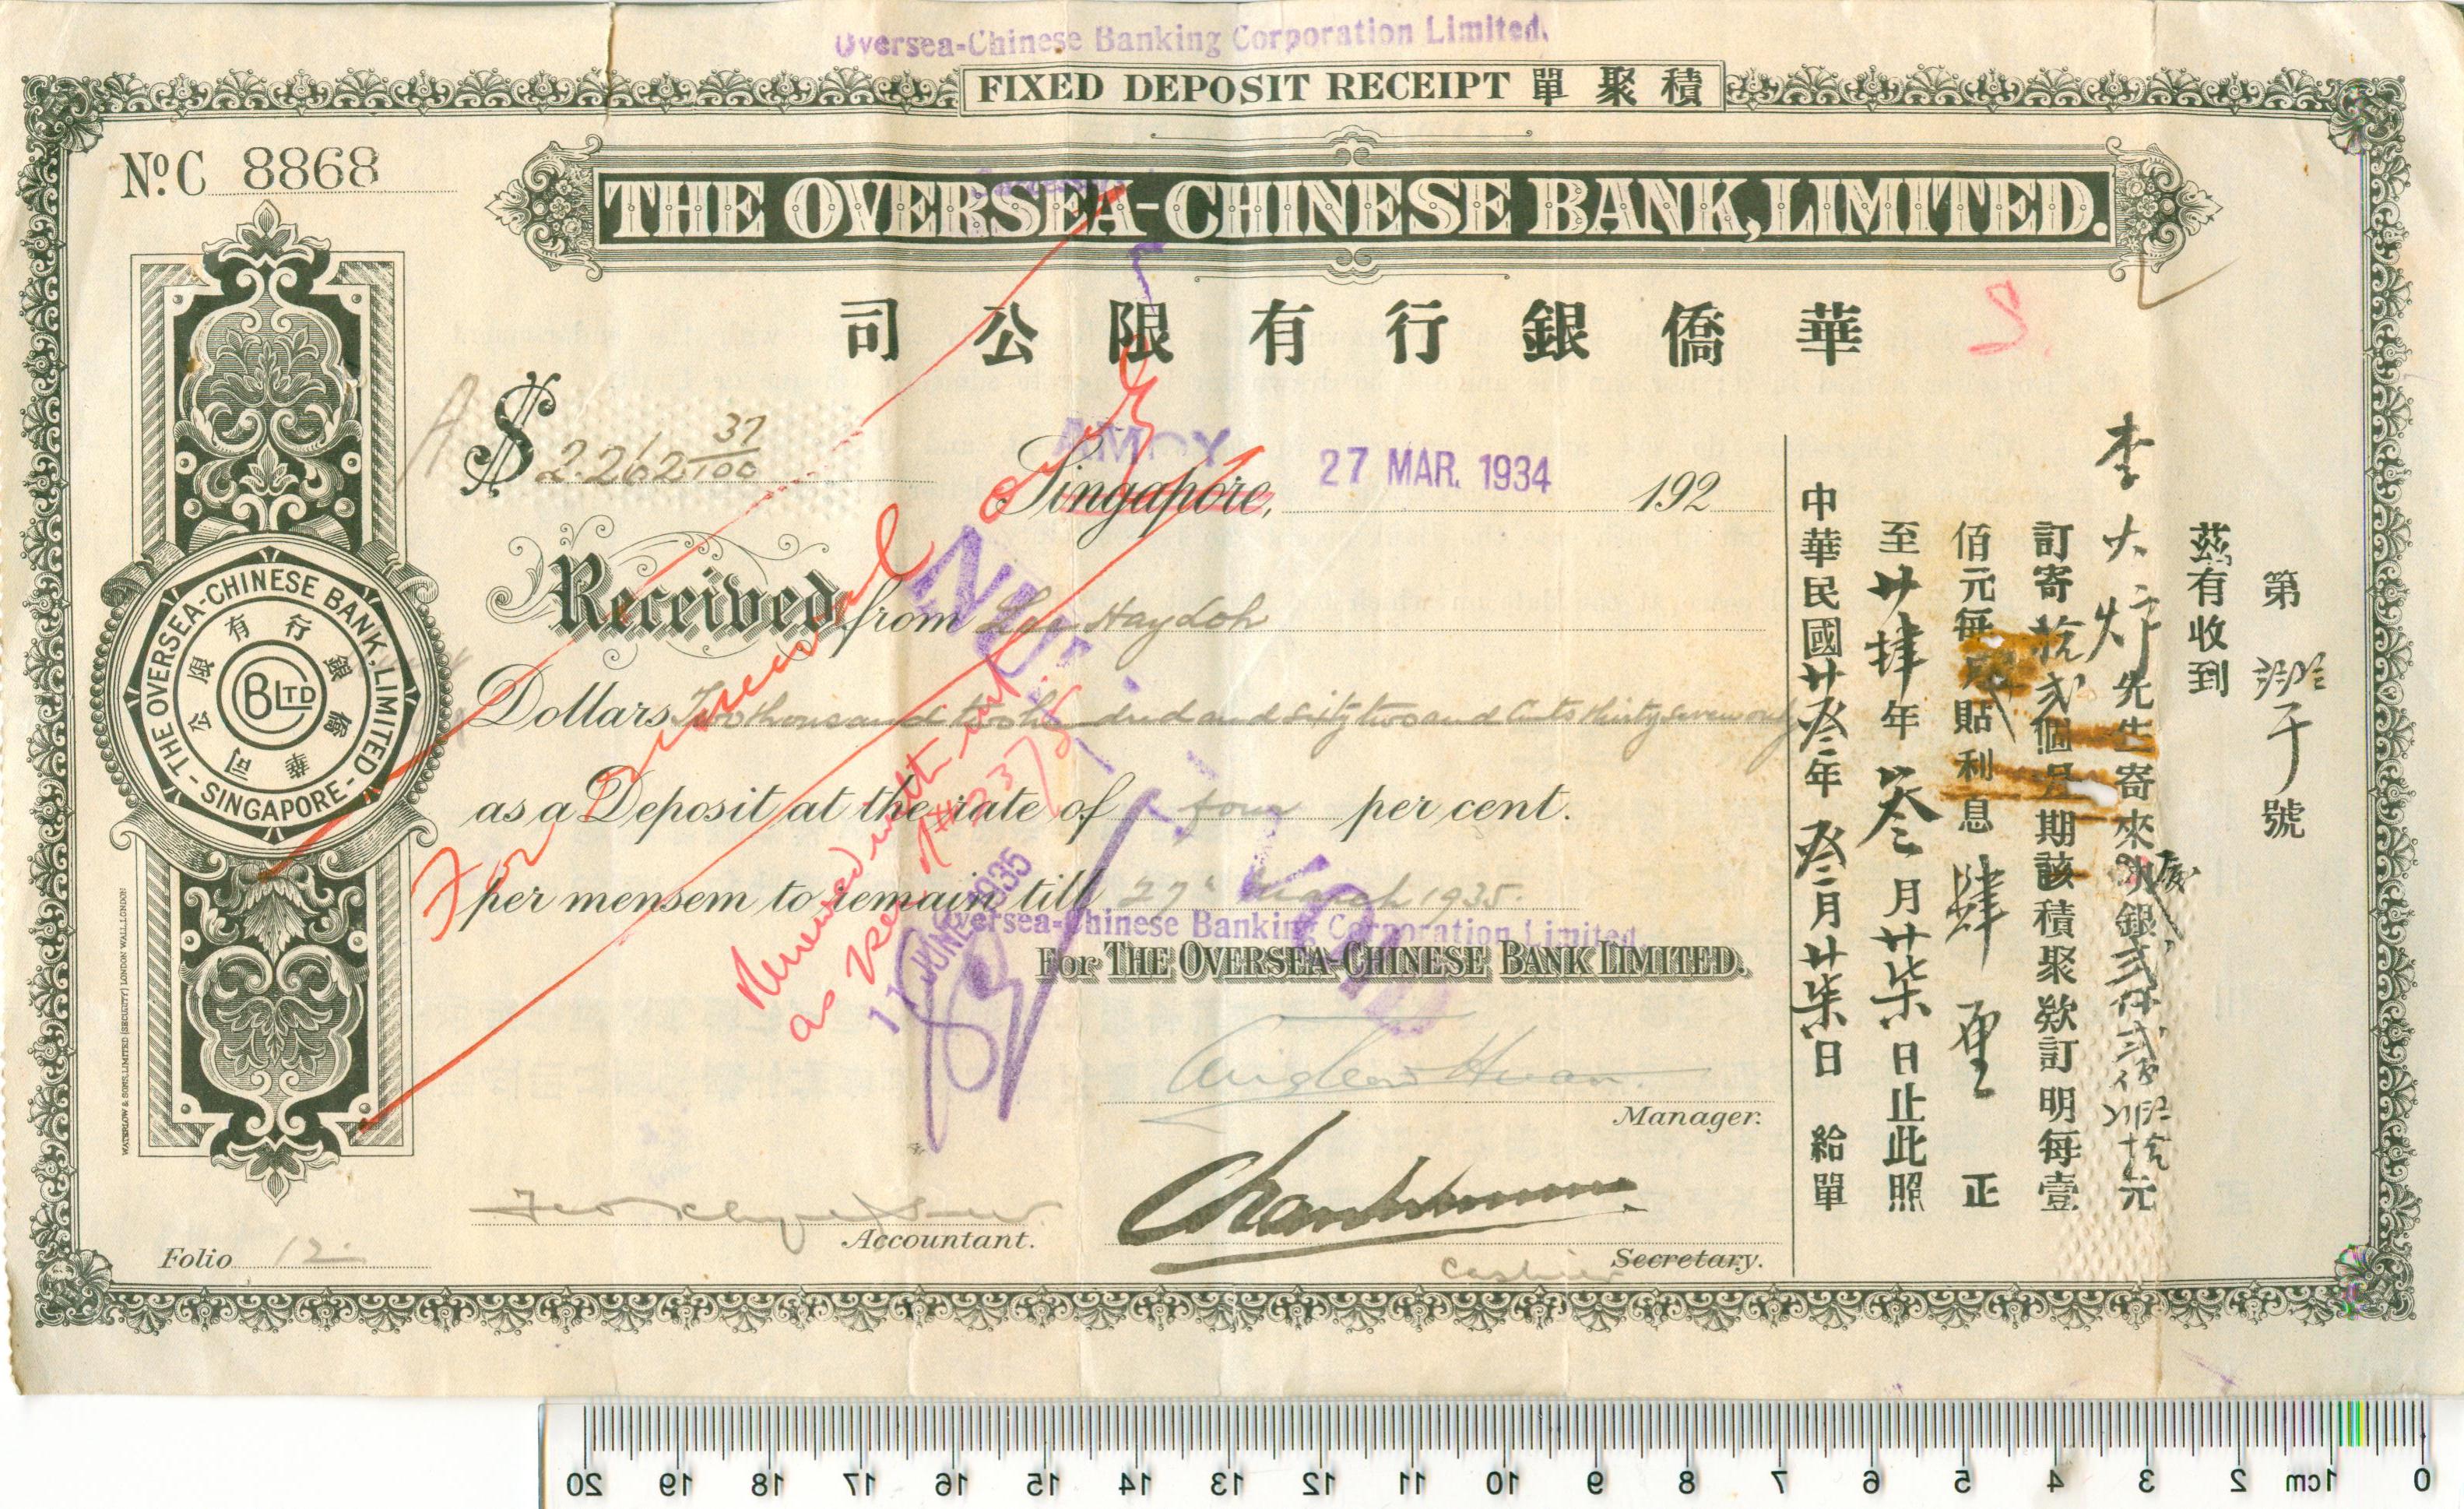 D2762, Fixed Deposit Receipt of Oversea-Chinese Bank, 1934